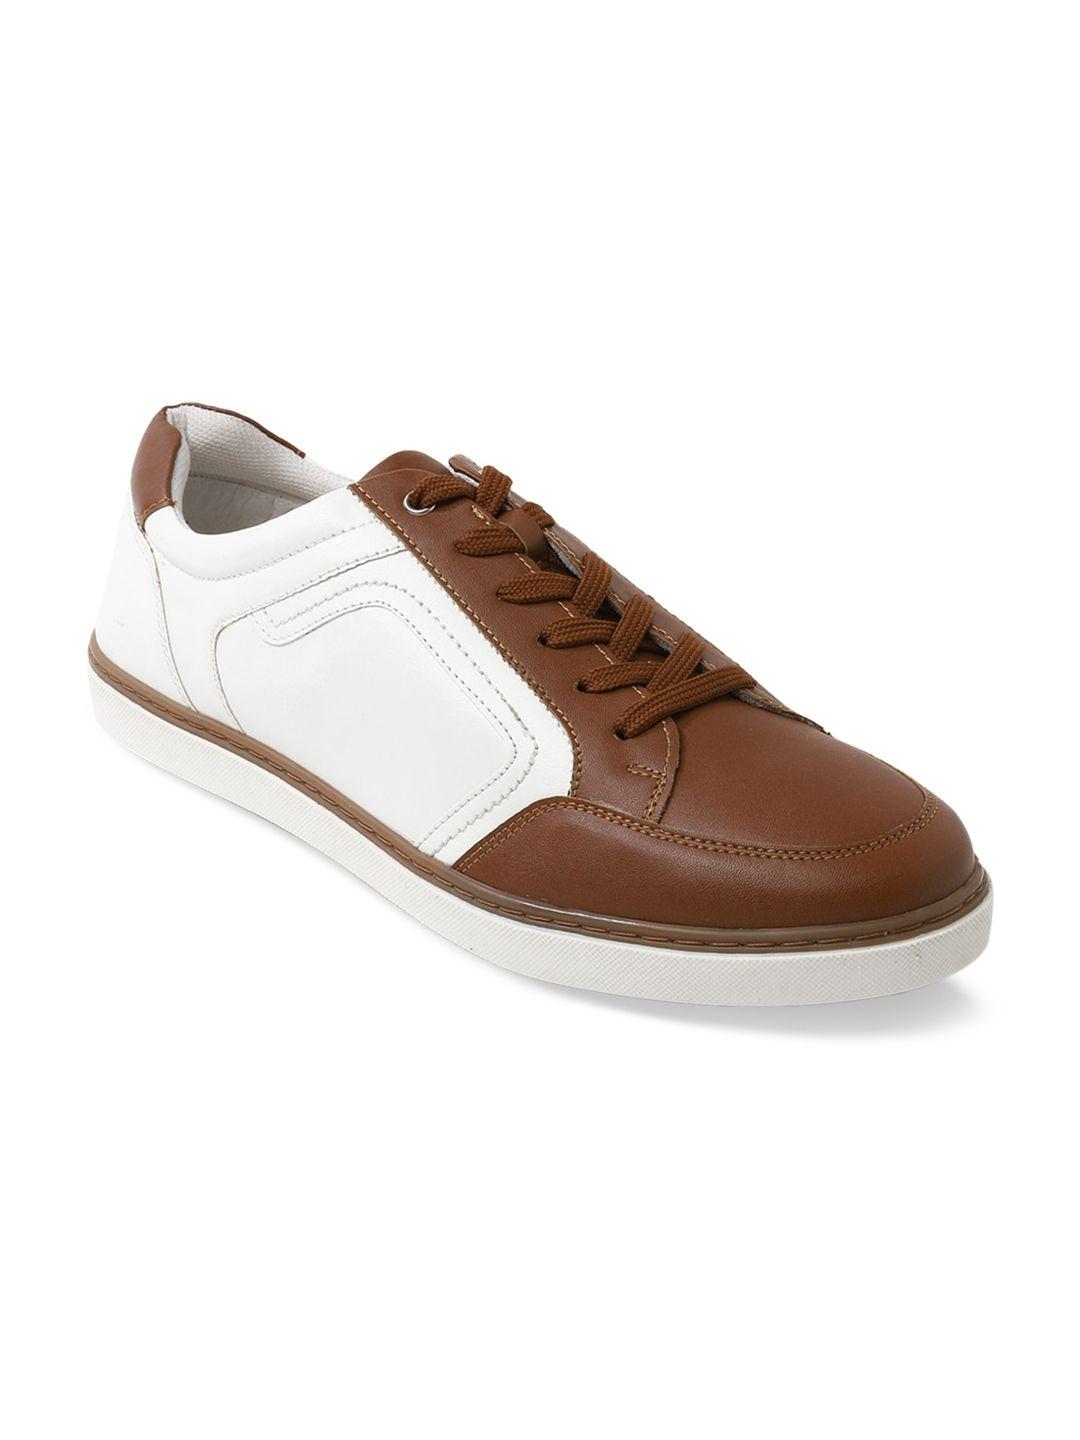 forever 21 men brown & white colourblocked pu sneakers